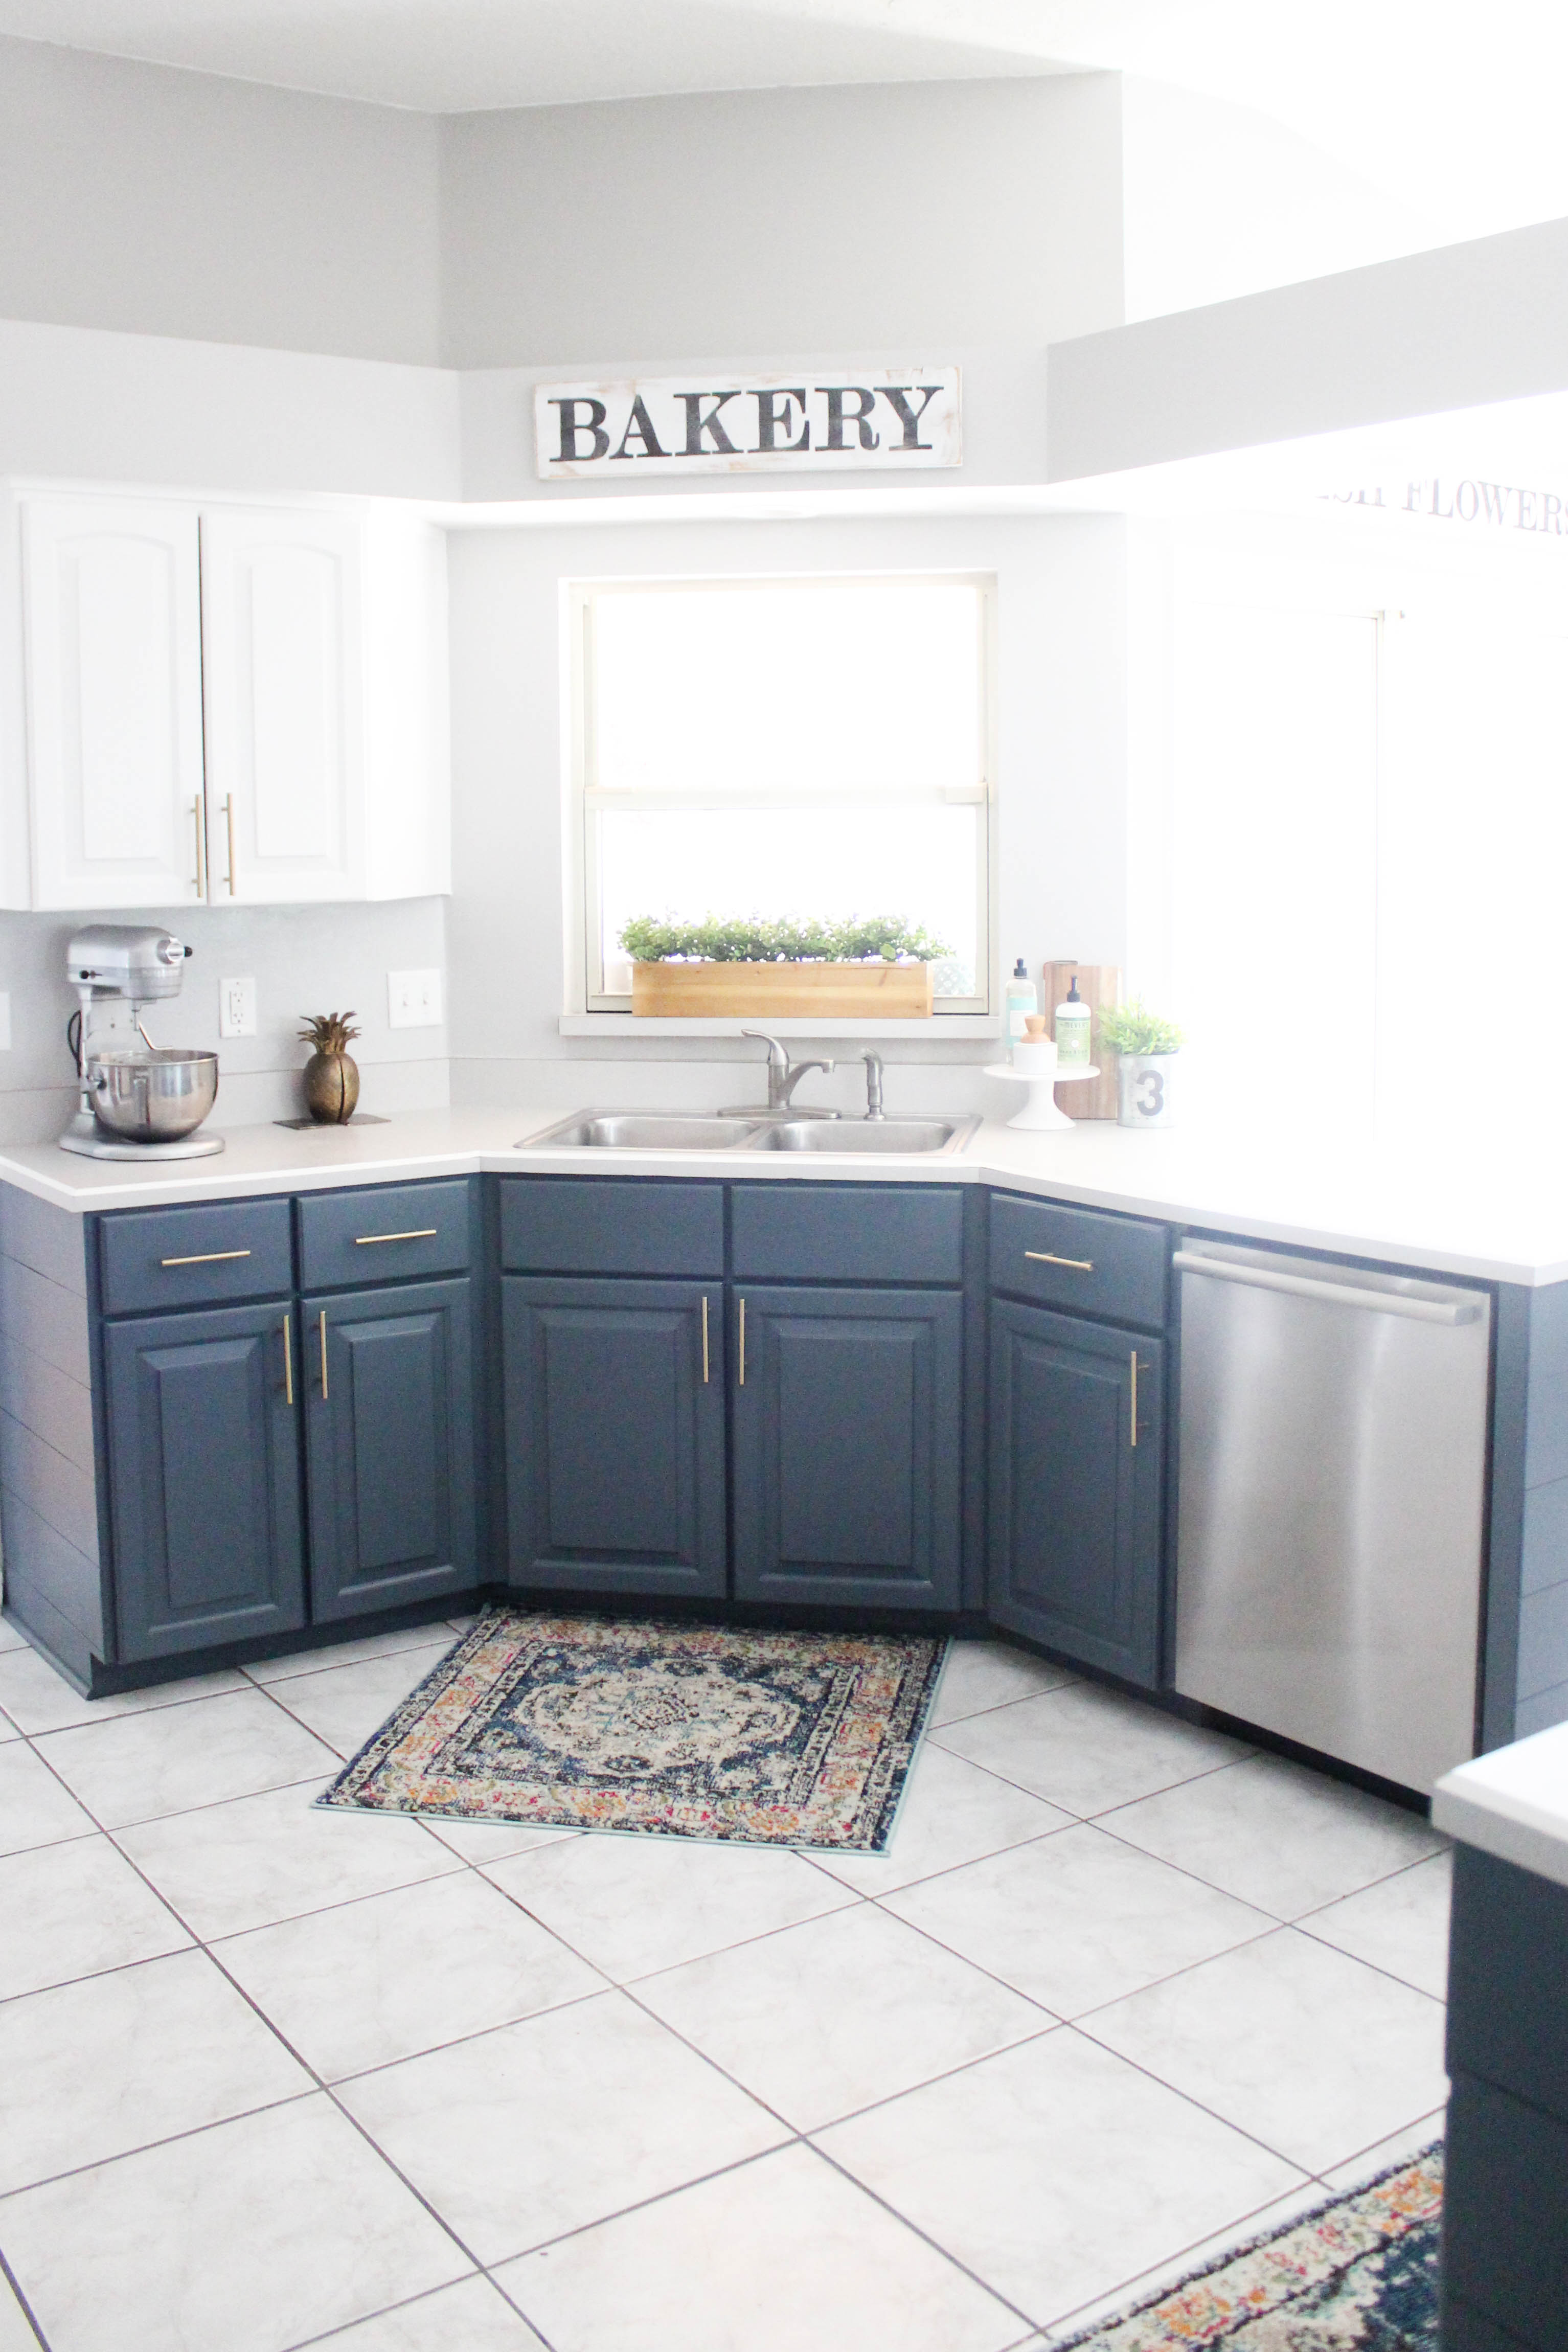 Before and after of our kitchen makeover